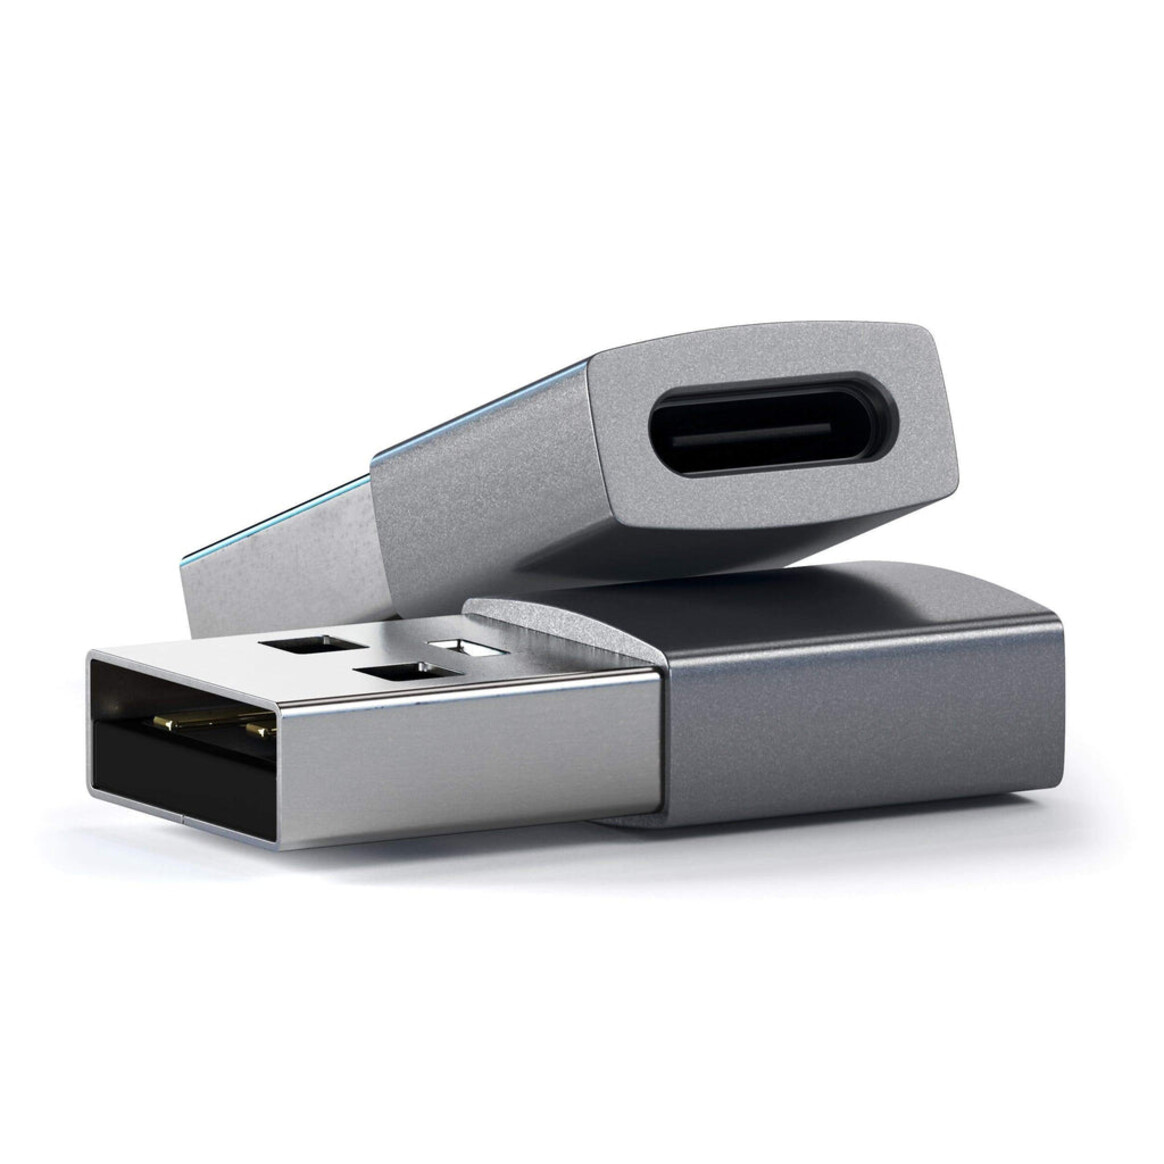 <h1 style="text-align: center;">Satechi Type-C Type A USB Adapter Space Gray</h1>